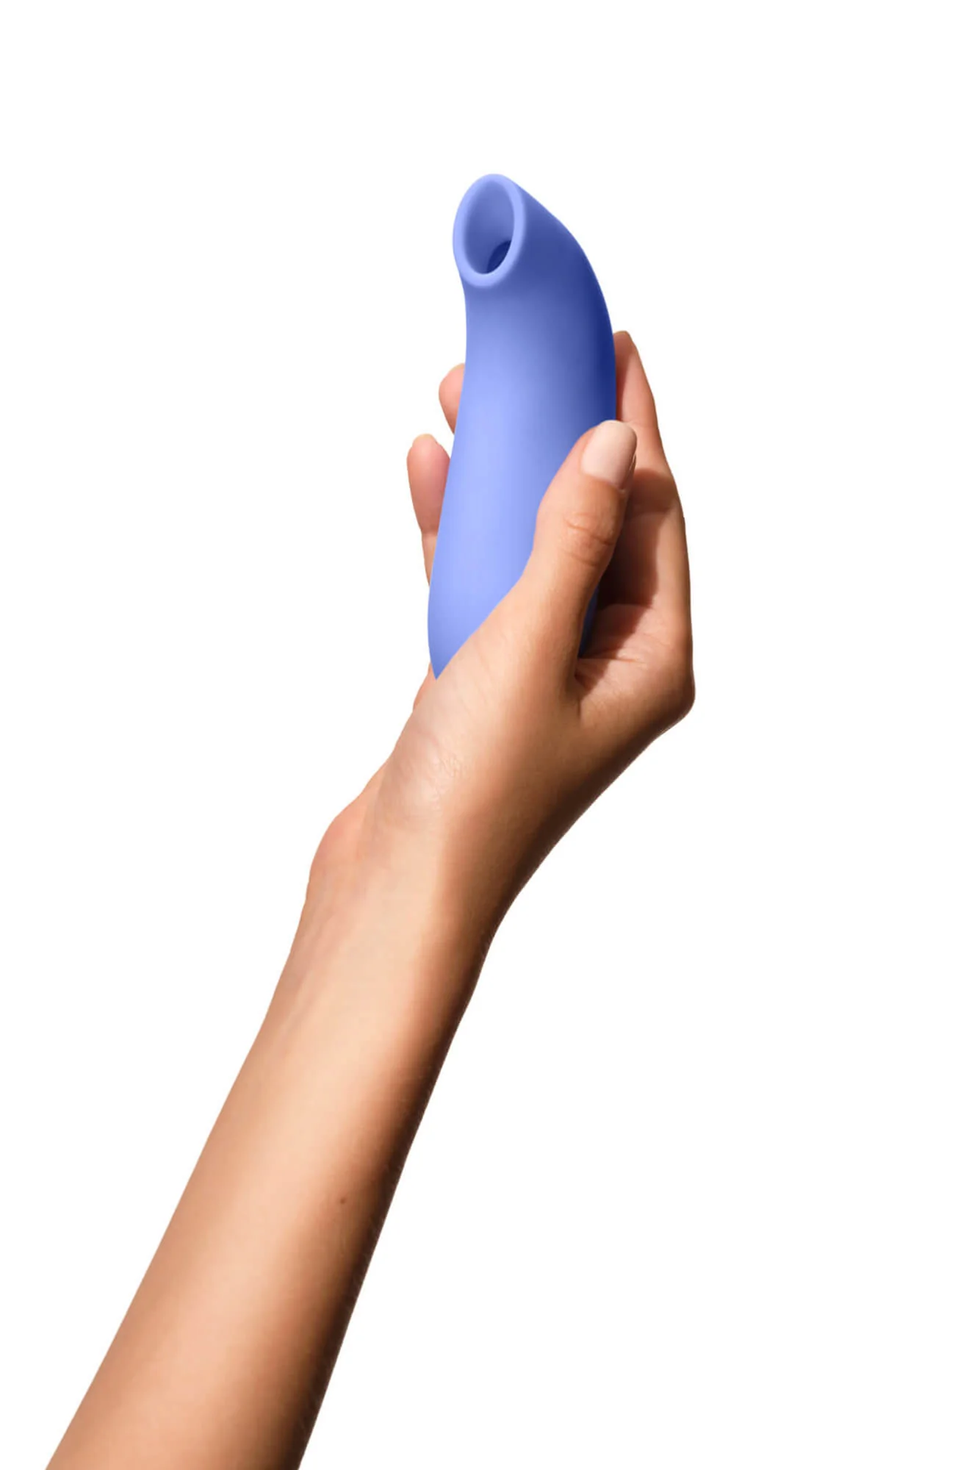 a hand holding a blue object